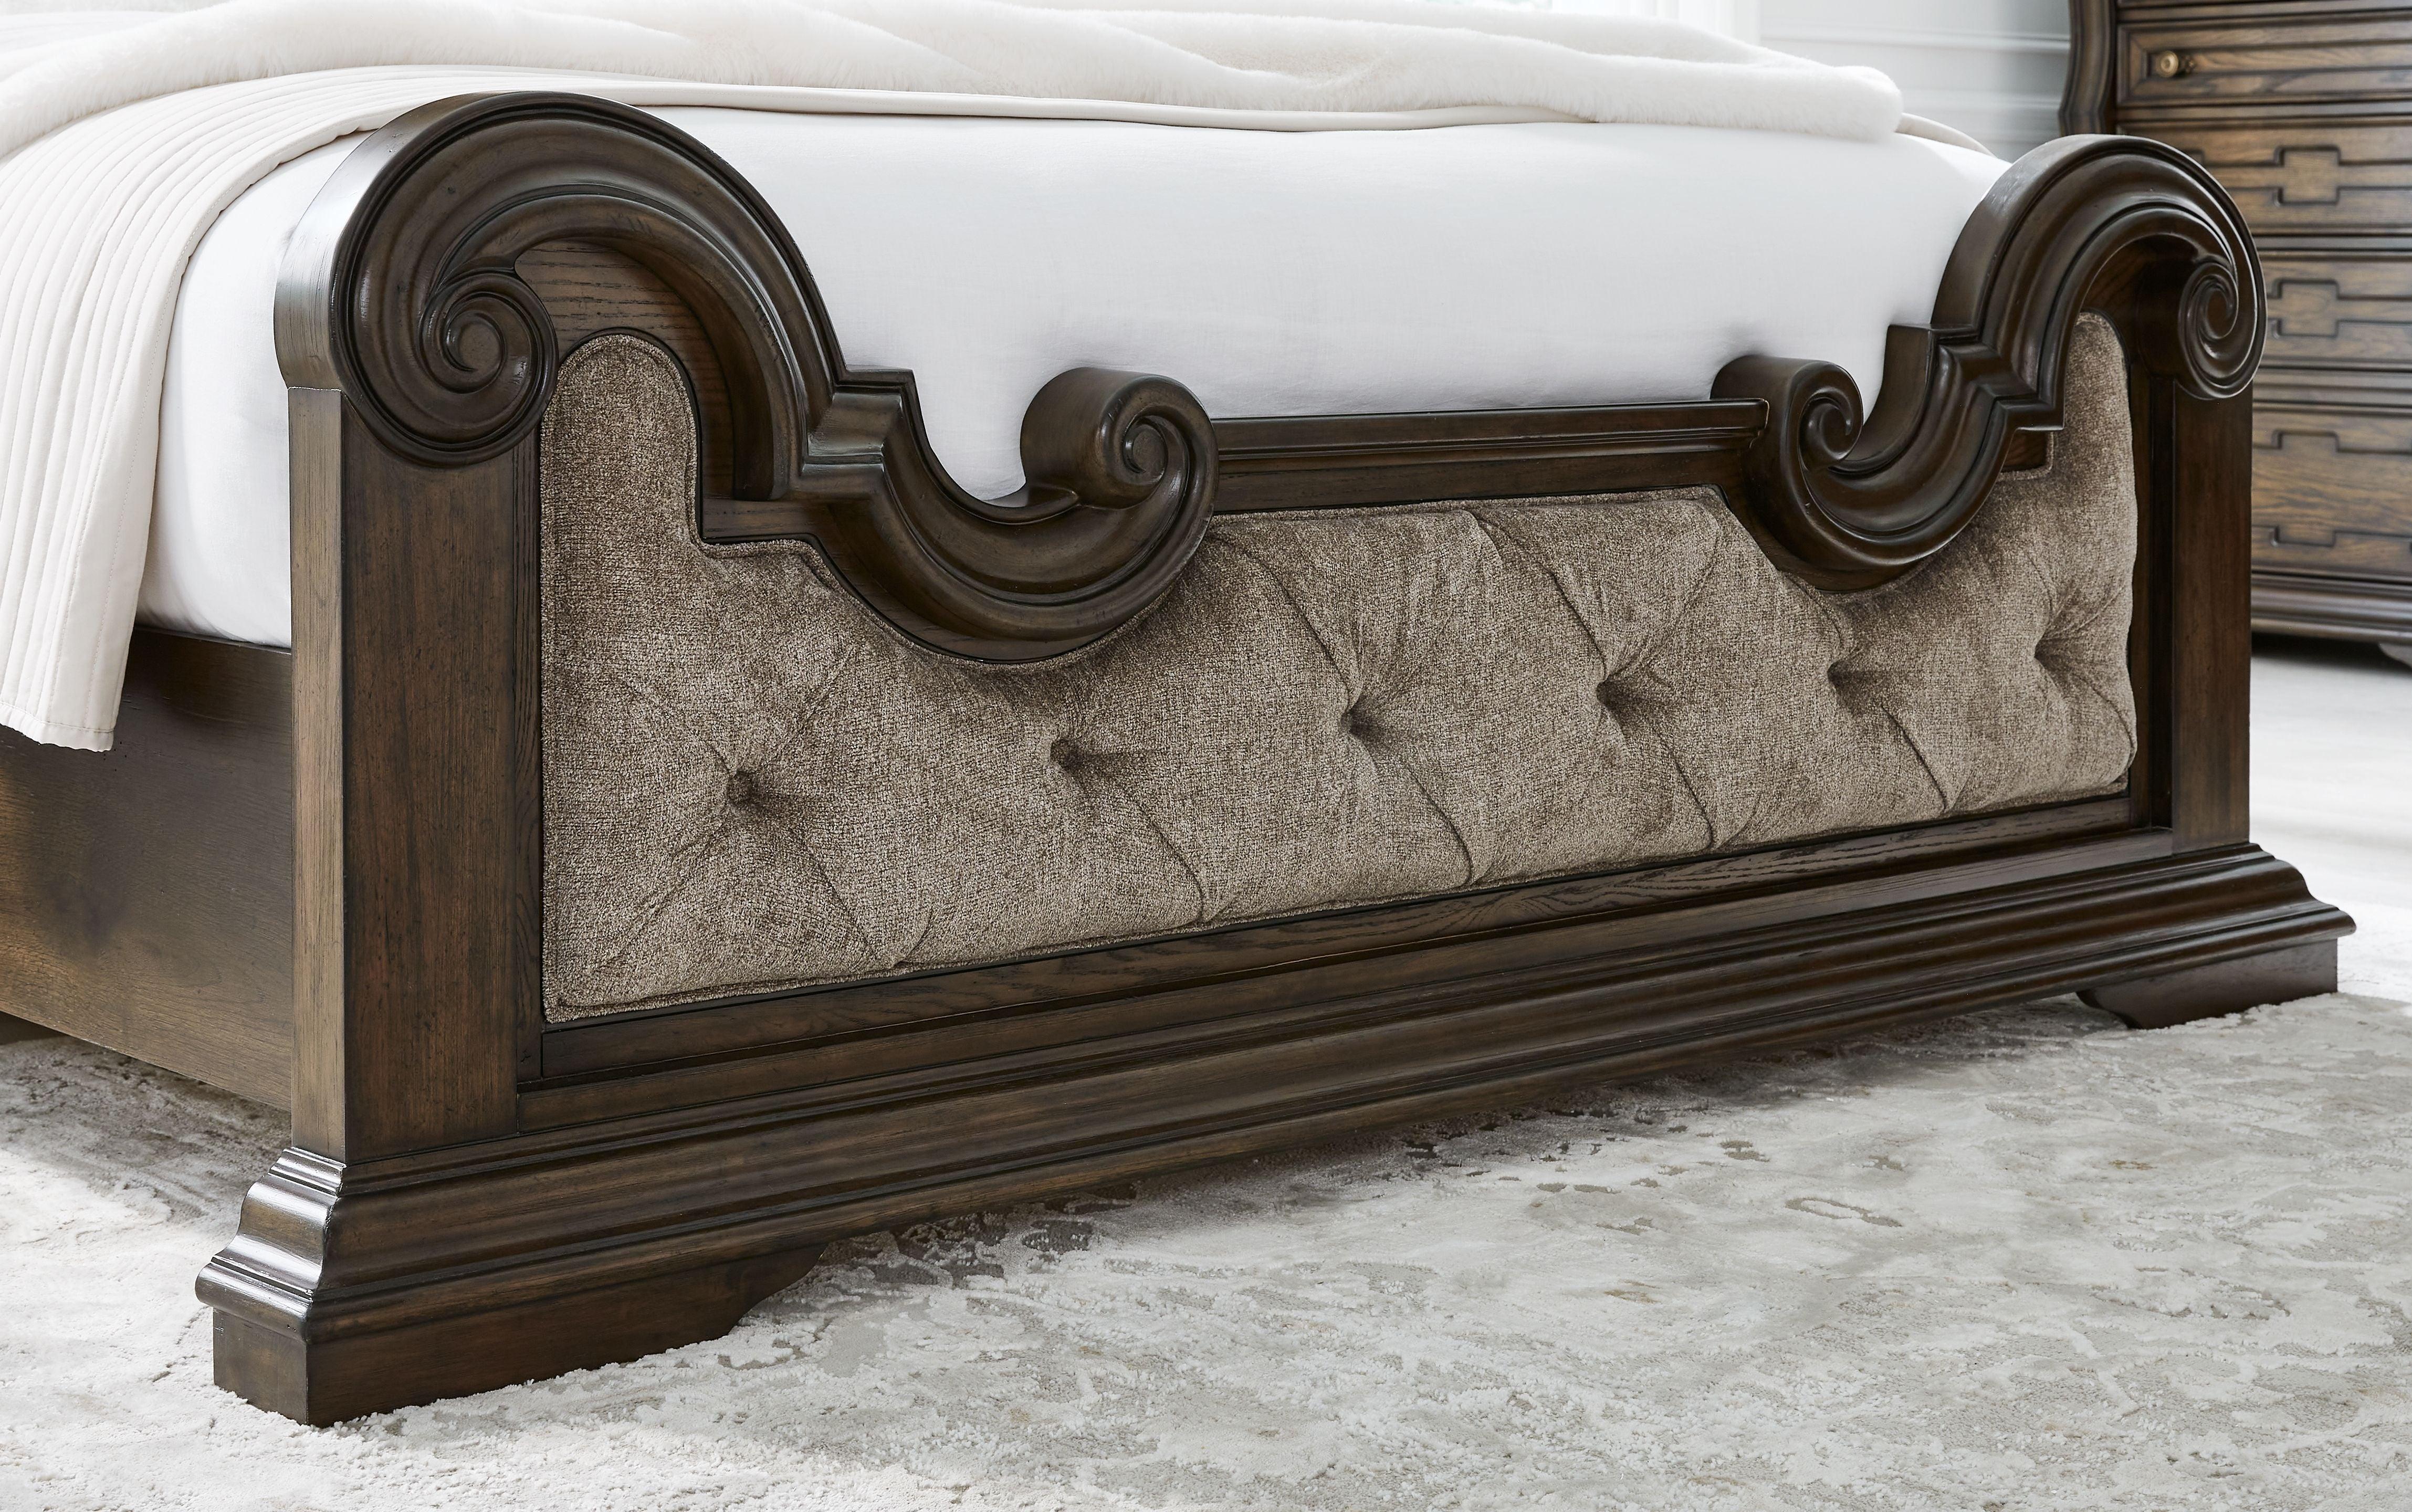 Signature Design by Ashley® - Maylee - Upholstered Bed - 5th Avenue Furniture